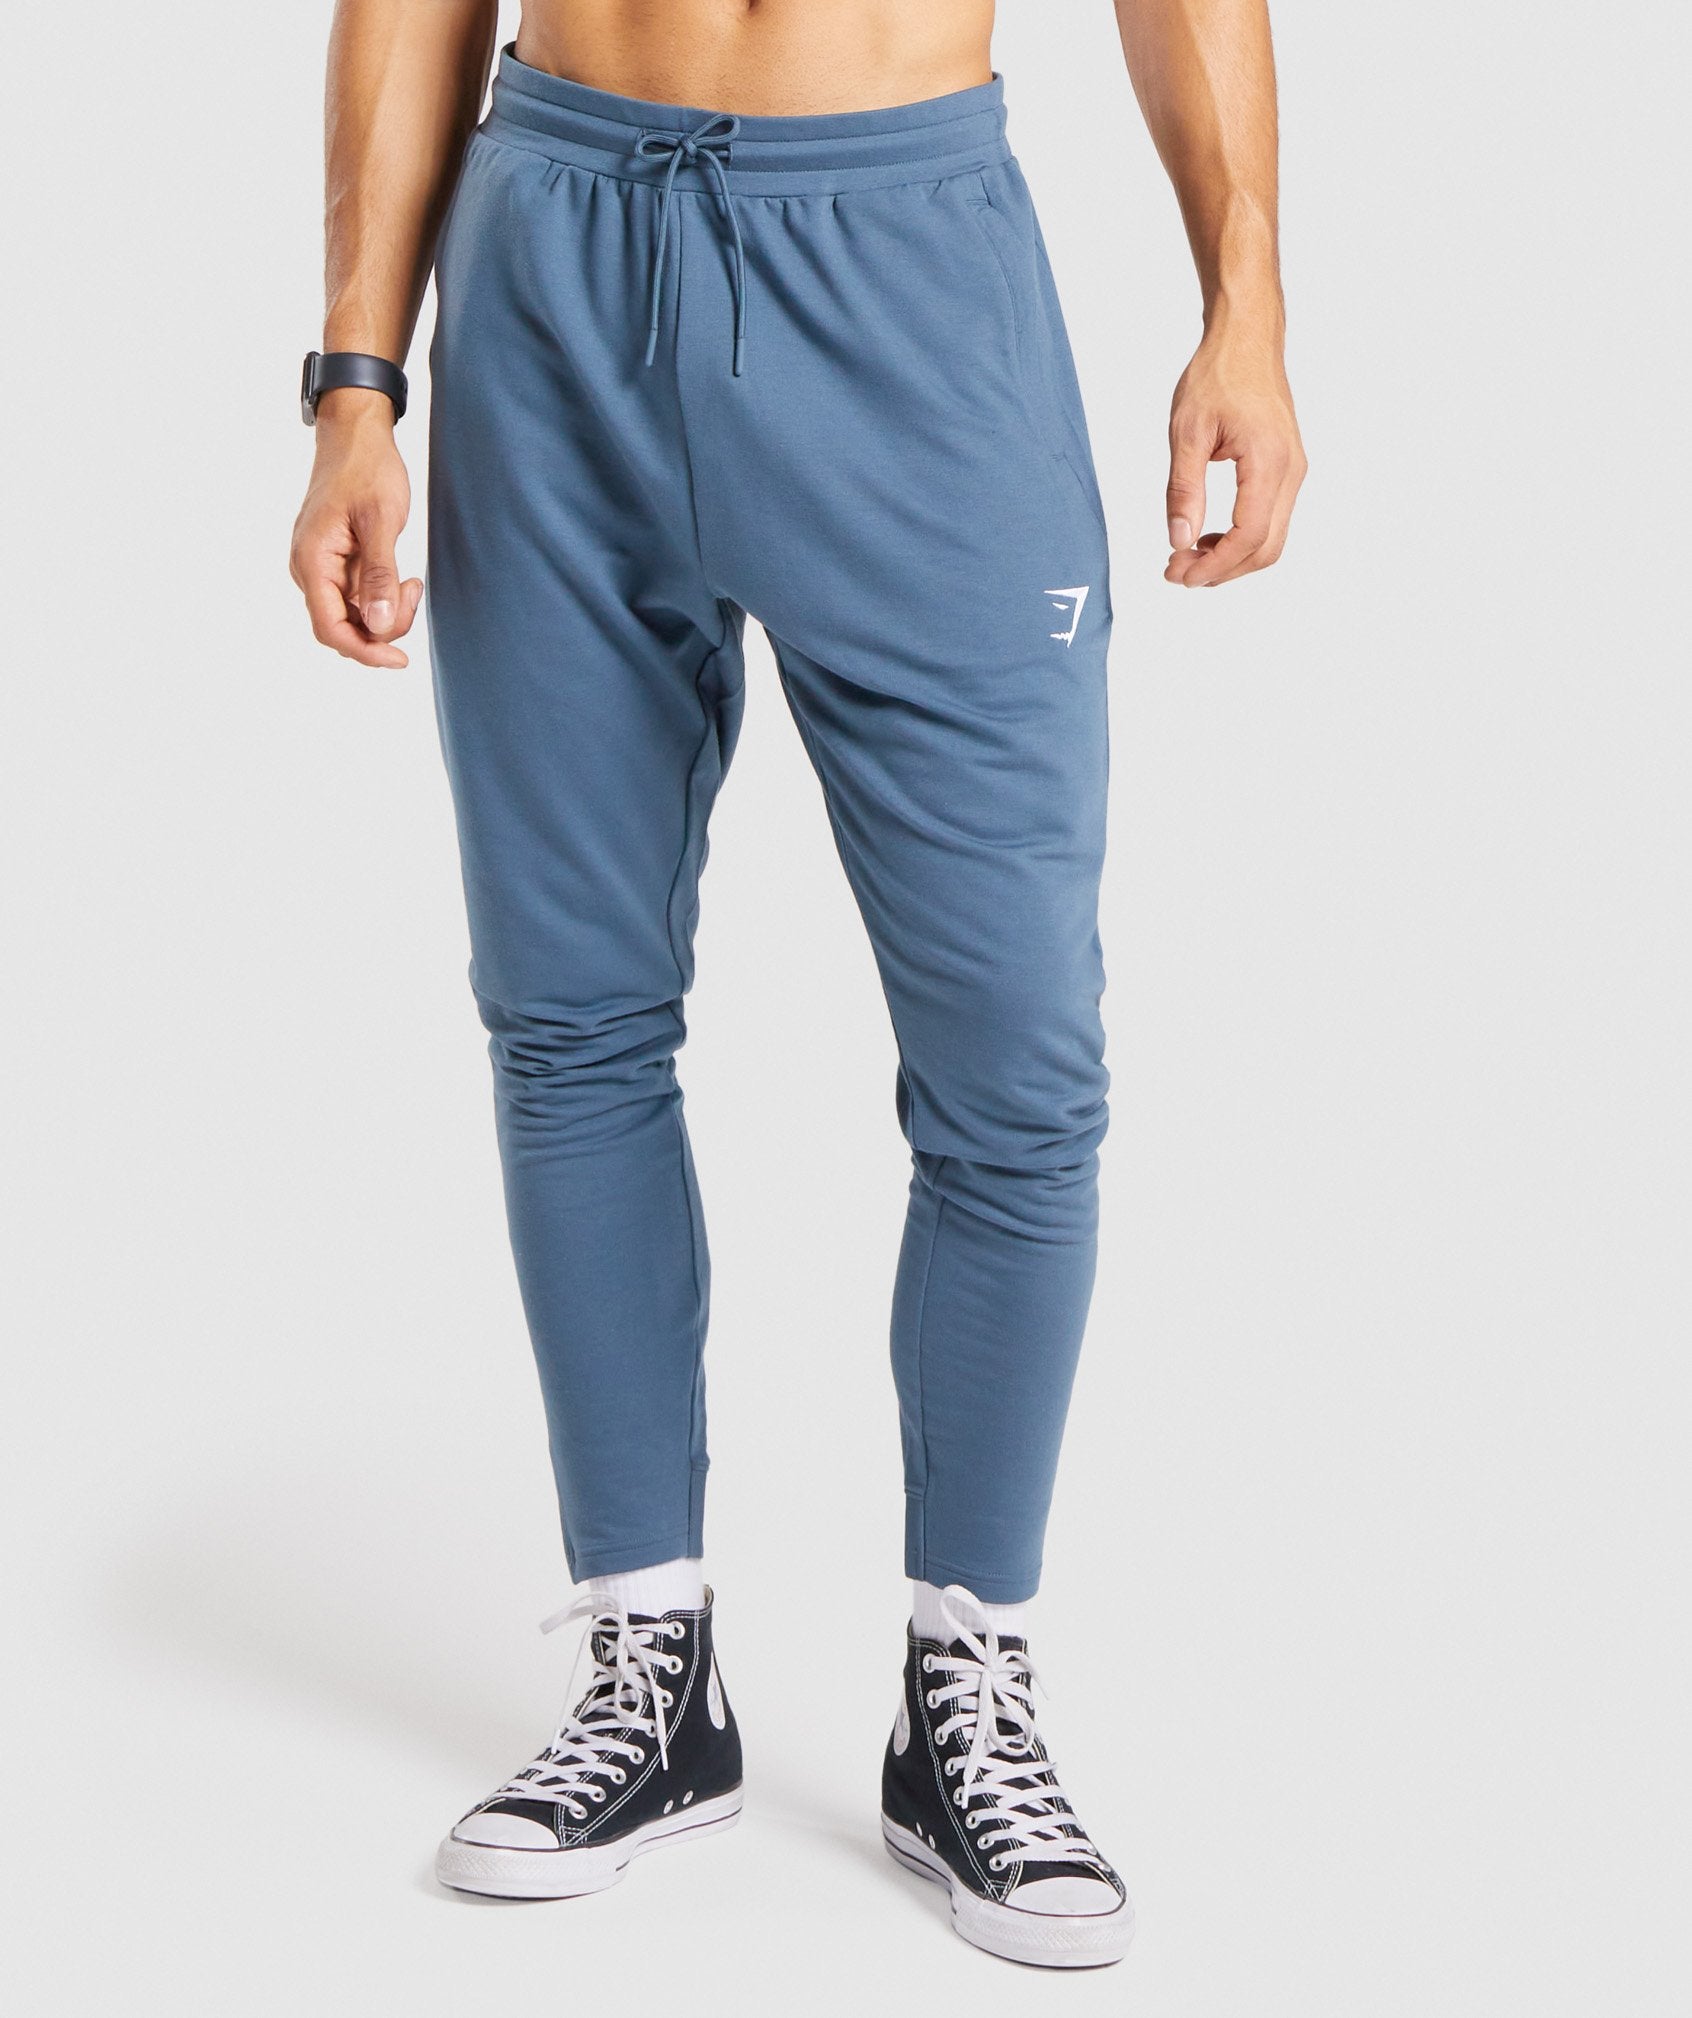 Critical Zip Joggers in Teal - view 1